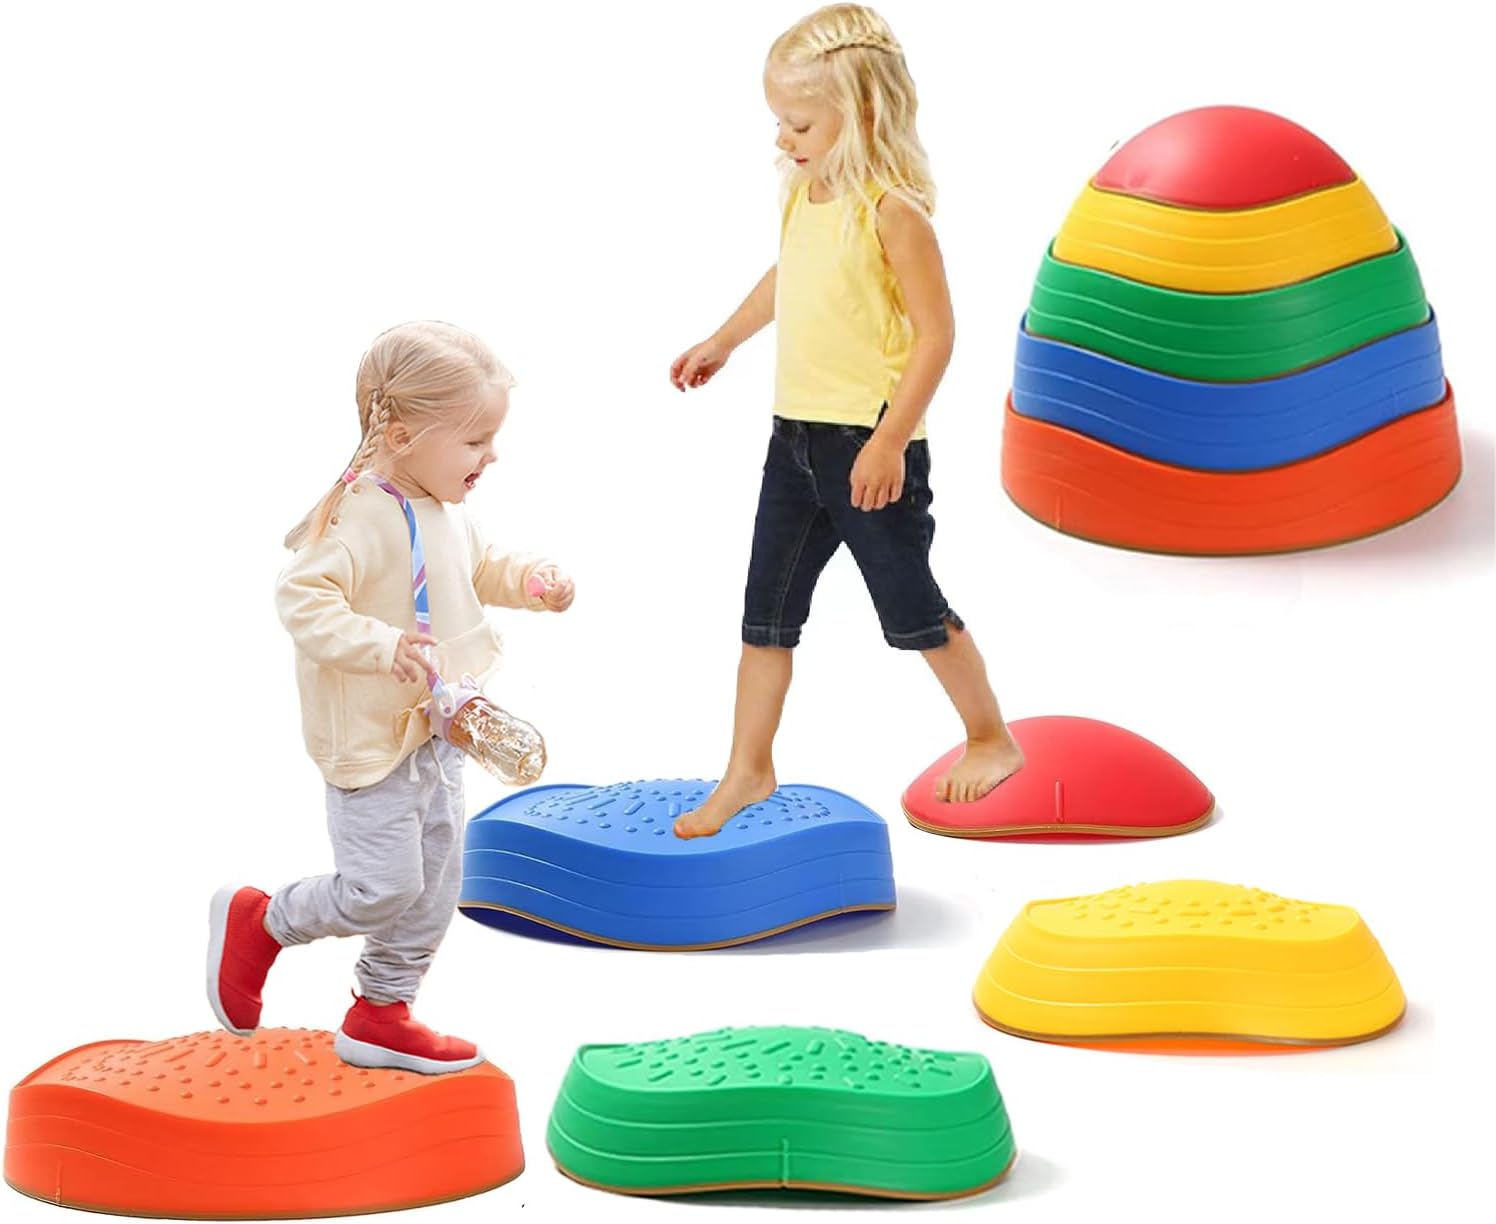 Fanboxk 5Pcs Non-Slip Plastic Balance Stepping Stones for kids,up to 220 Ibs for PomotingChildren's Coordination Skills Obstacle Courses Sensory Toys for Toddlers,Indoor or Outdoor Play